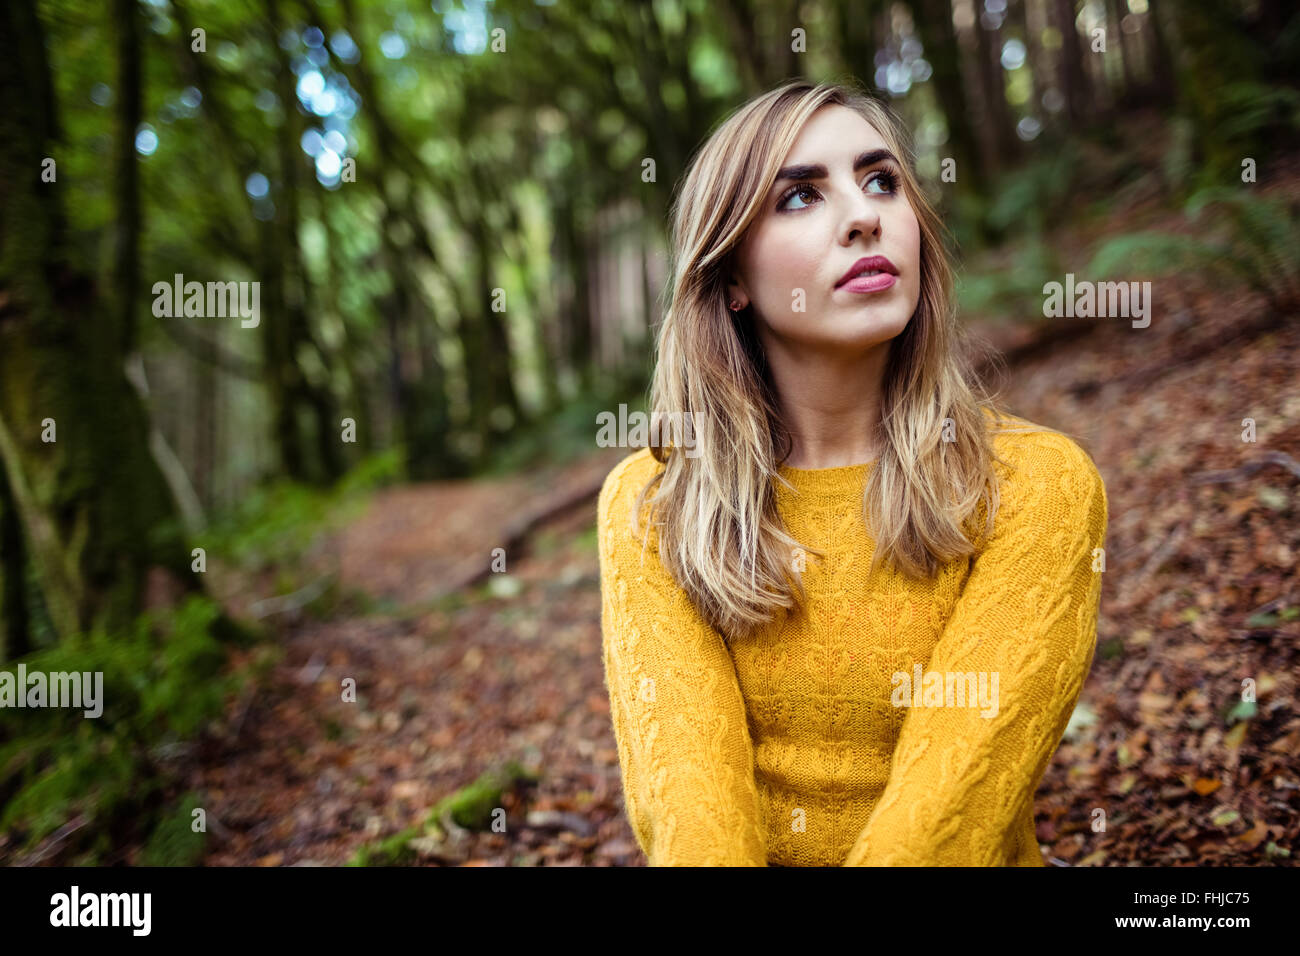 Pretty blonde woman day dreaming Stock Photo